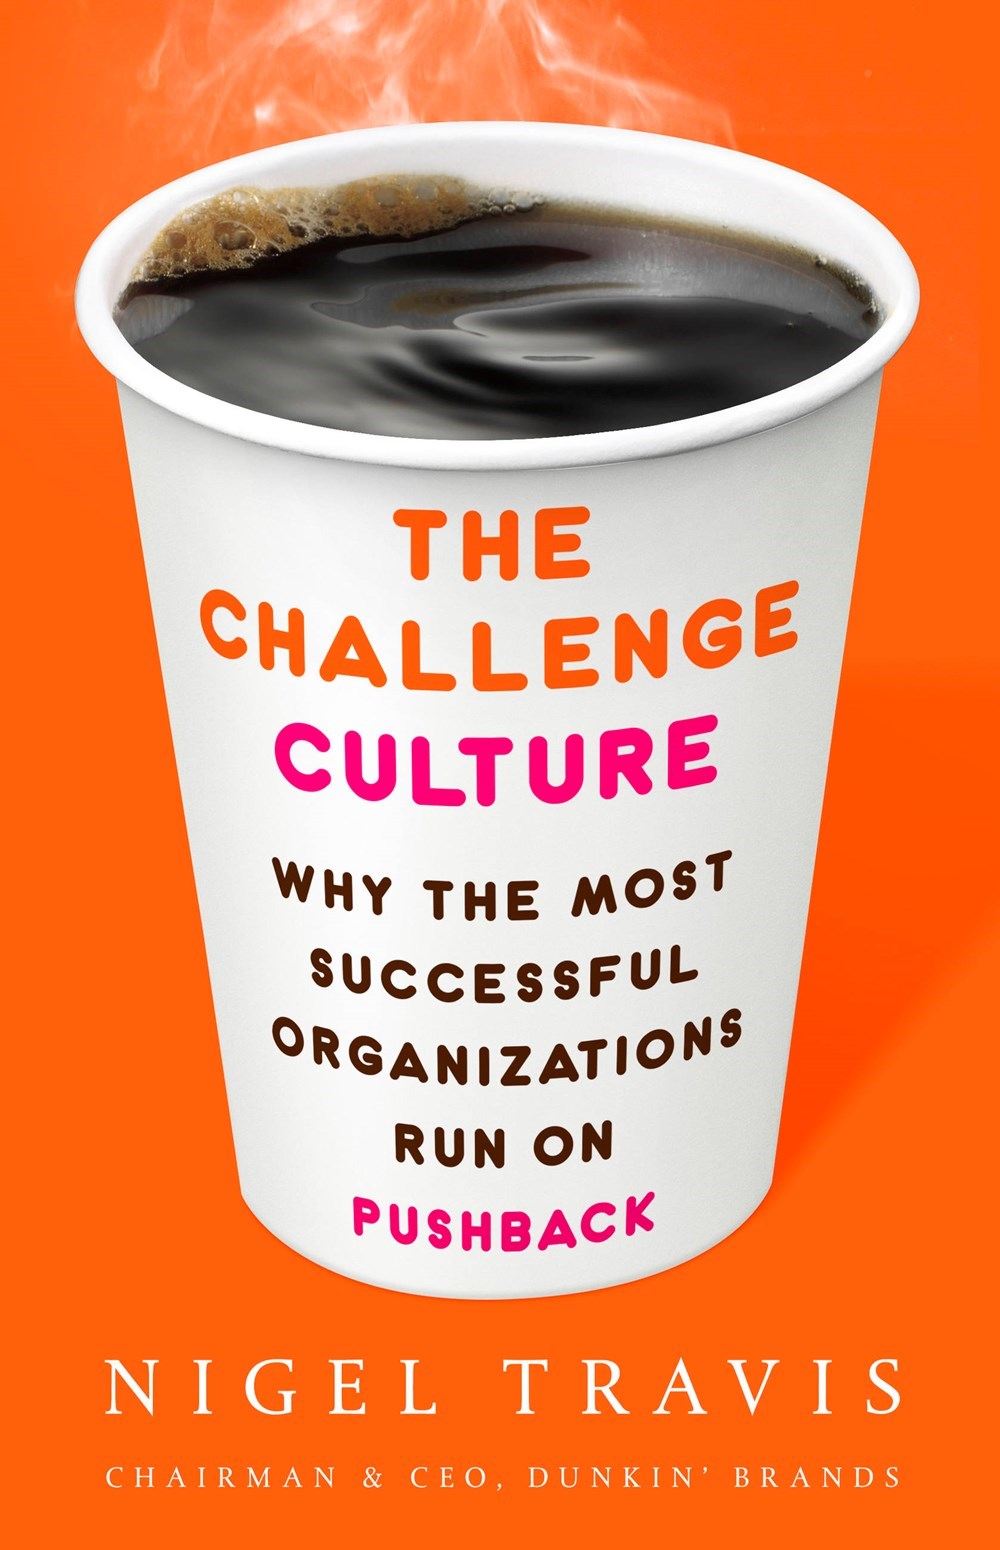 The Challenge Culture